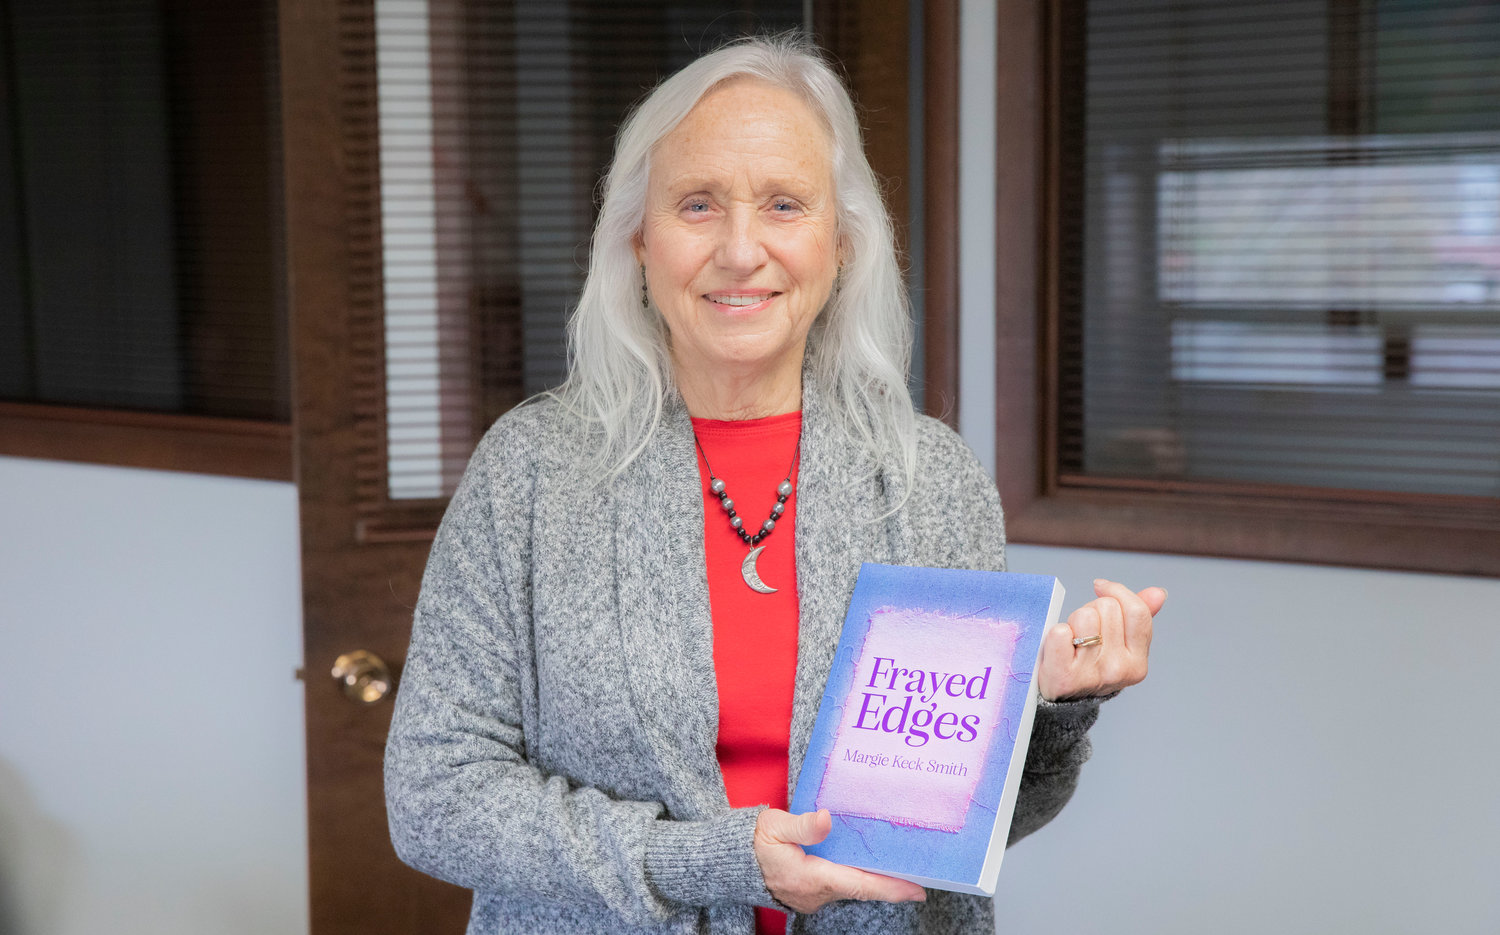 Margie Keck Smith smiles for a photo with her new book titled ”Frayed Edges” in Centralia on Tuesday, Jan. 17.